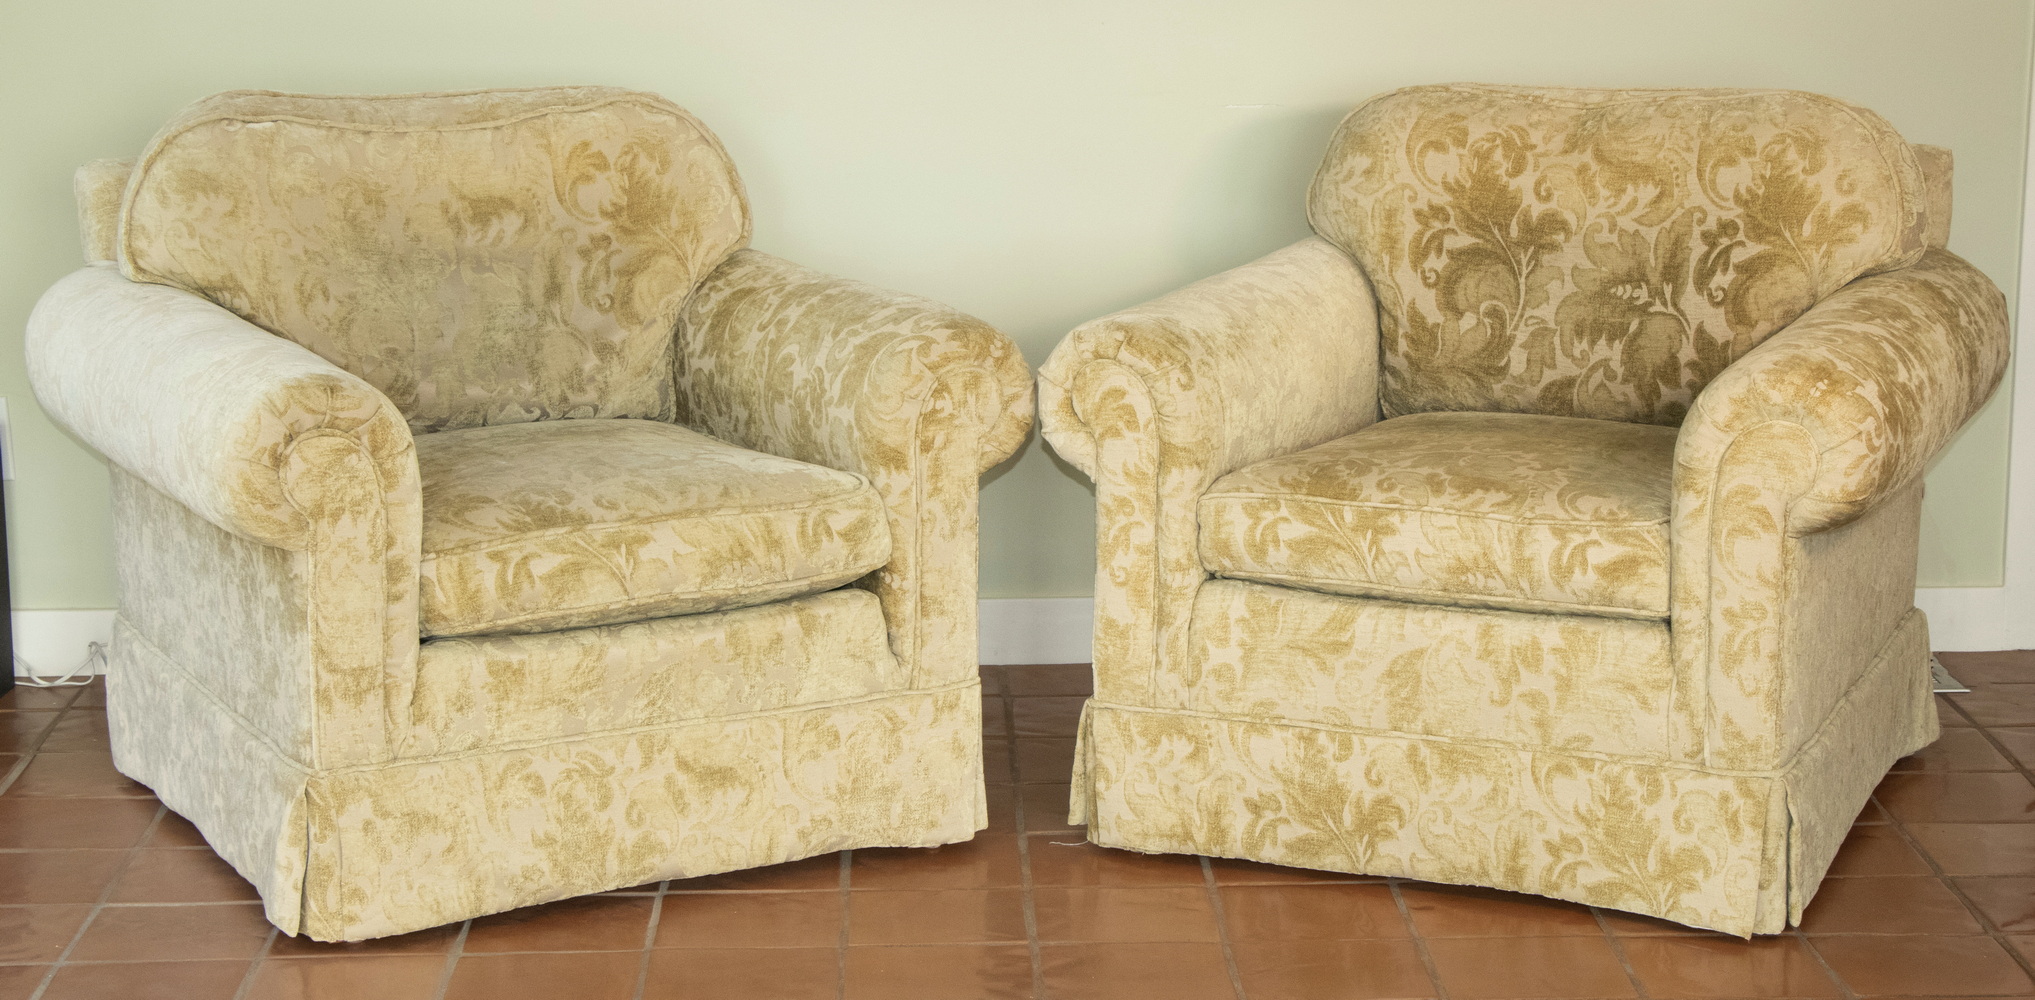 PR OF GREEN UPHOLSTERED ARMCHAIRS 2d671f